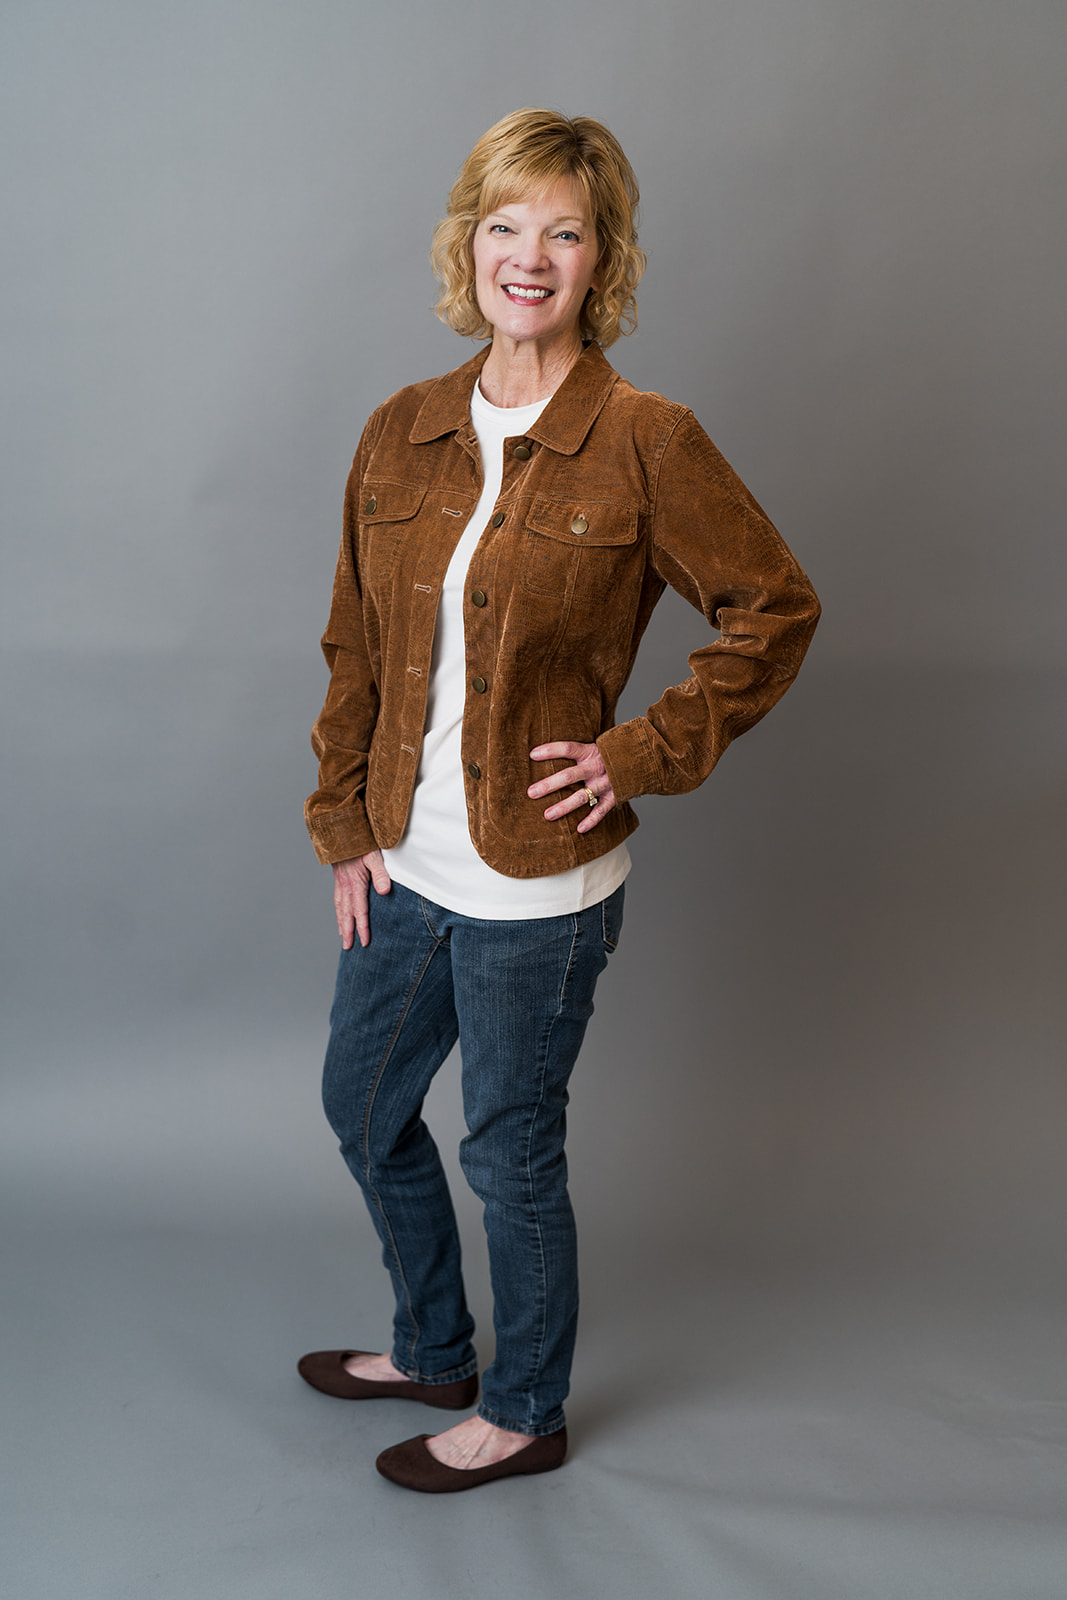 Blonde woman in jeans and a brown jacket poses for a brading session